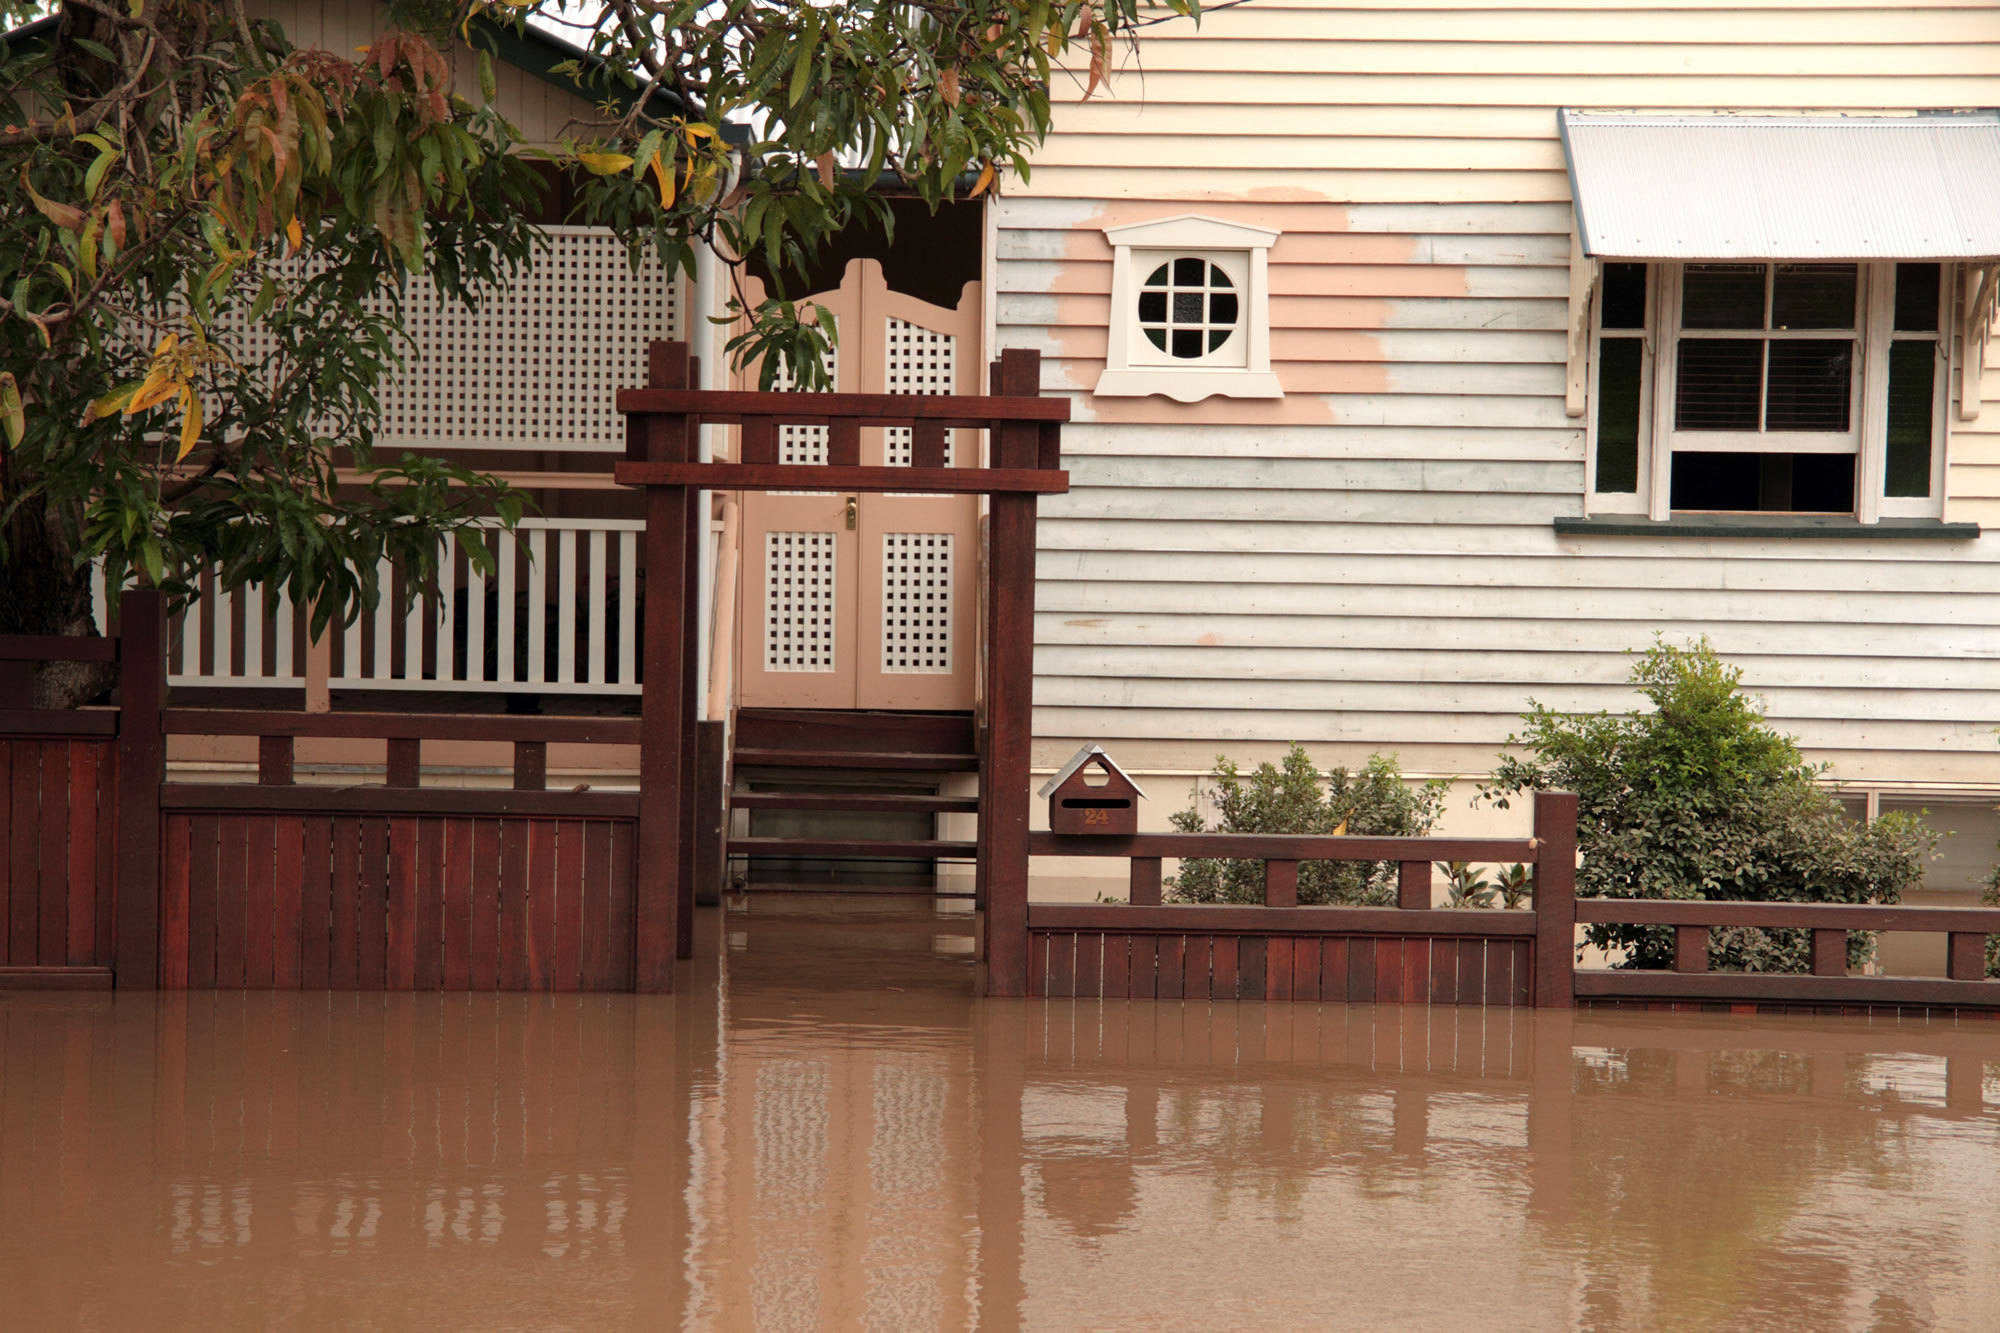 House surrounded by flood water up to the front deck